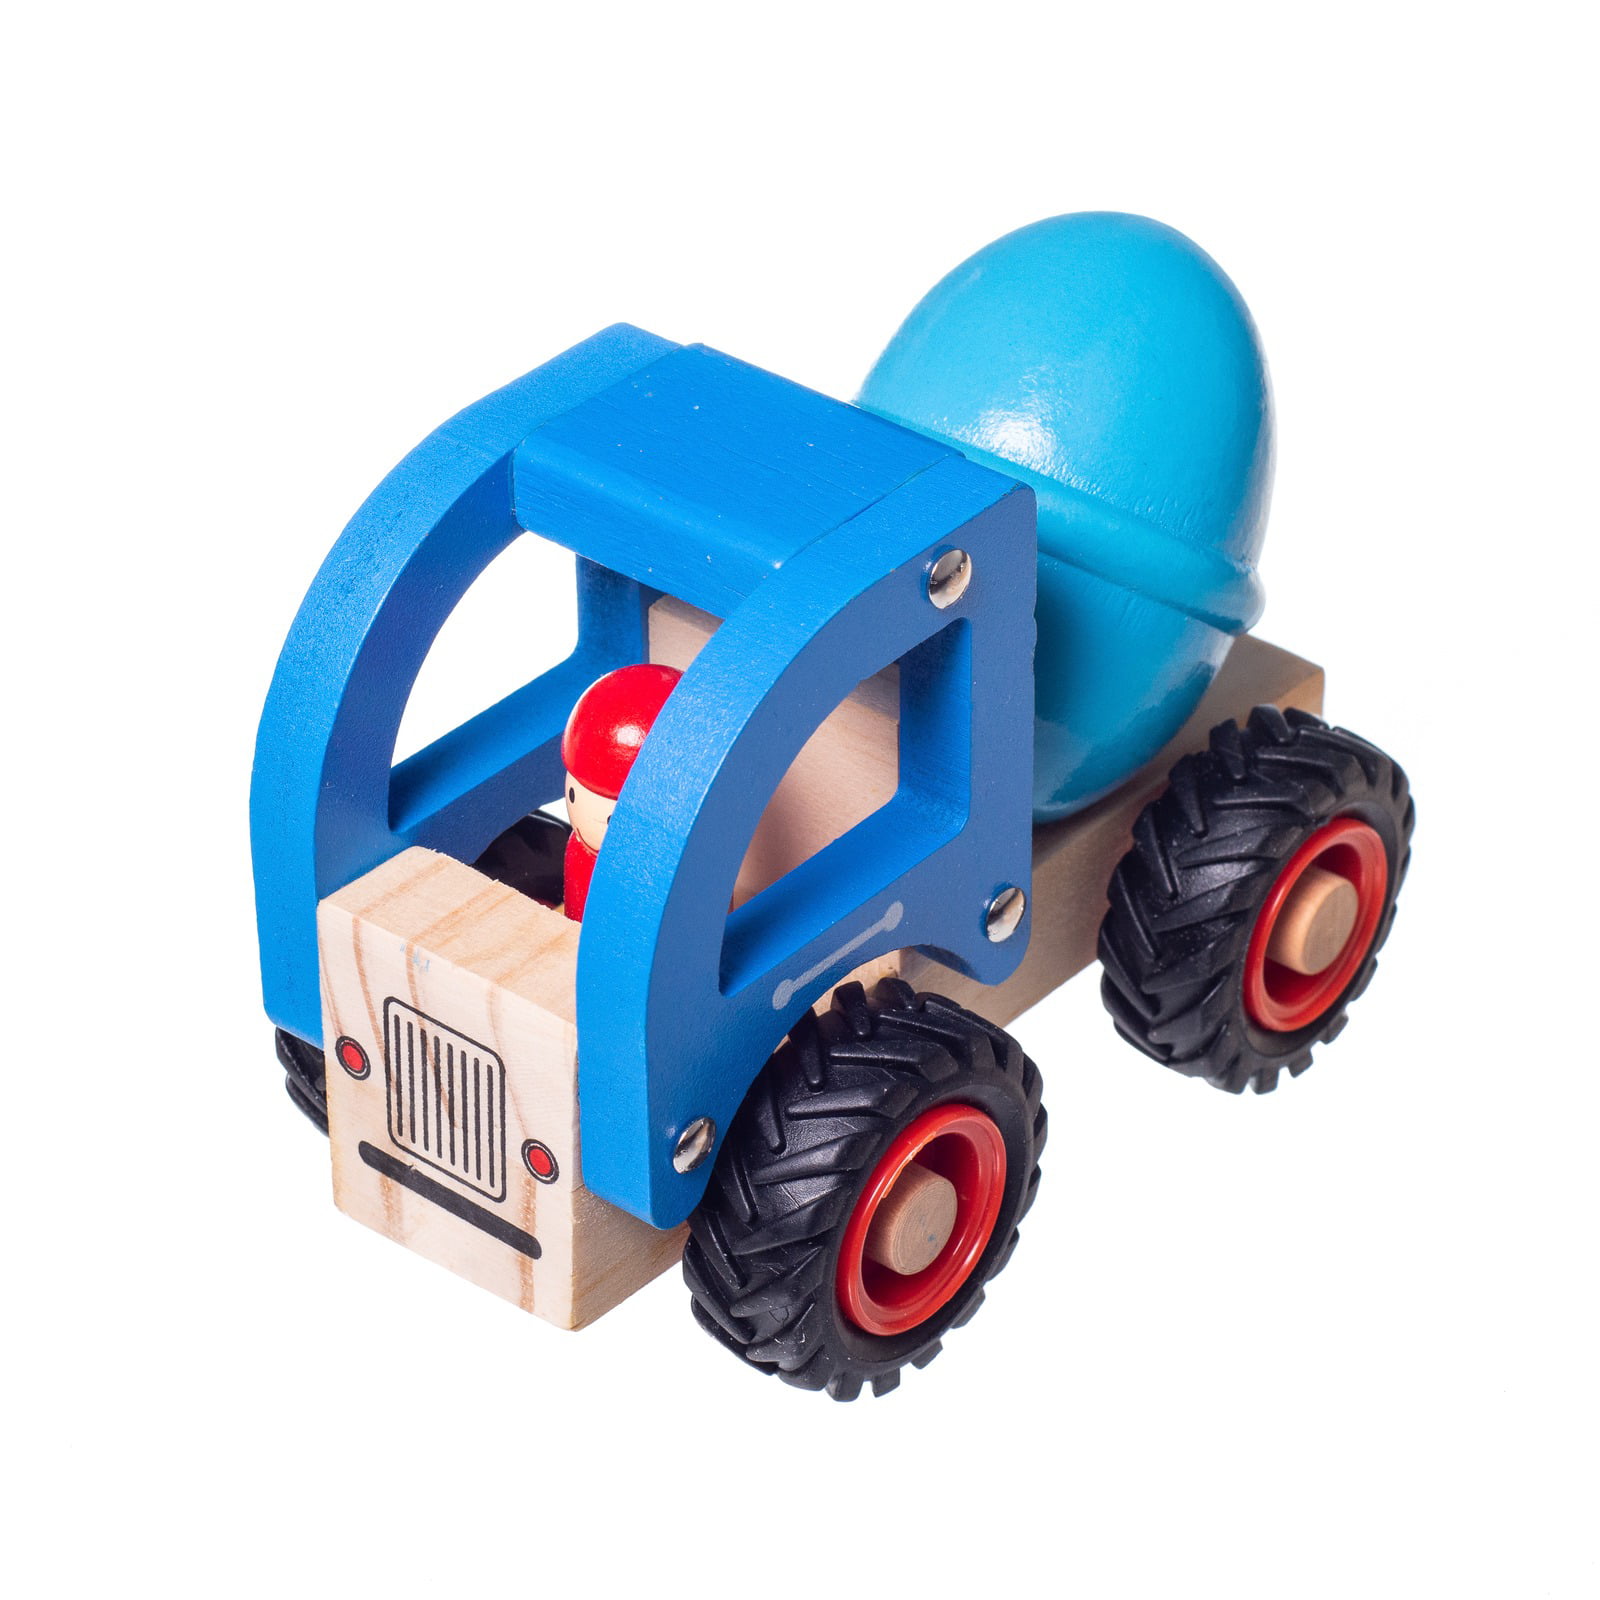 Eliiti Wooden Trash Truck Toy Vehicle for Boys Kids 3 to 6 Years Old 